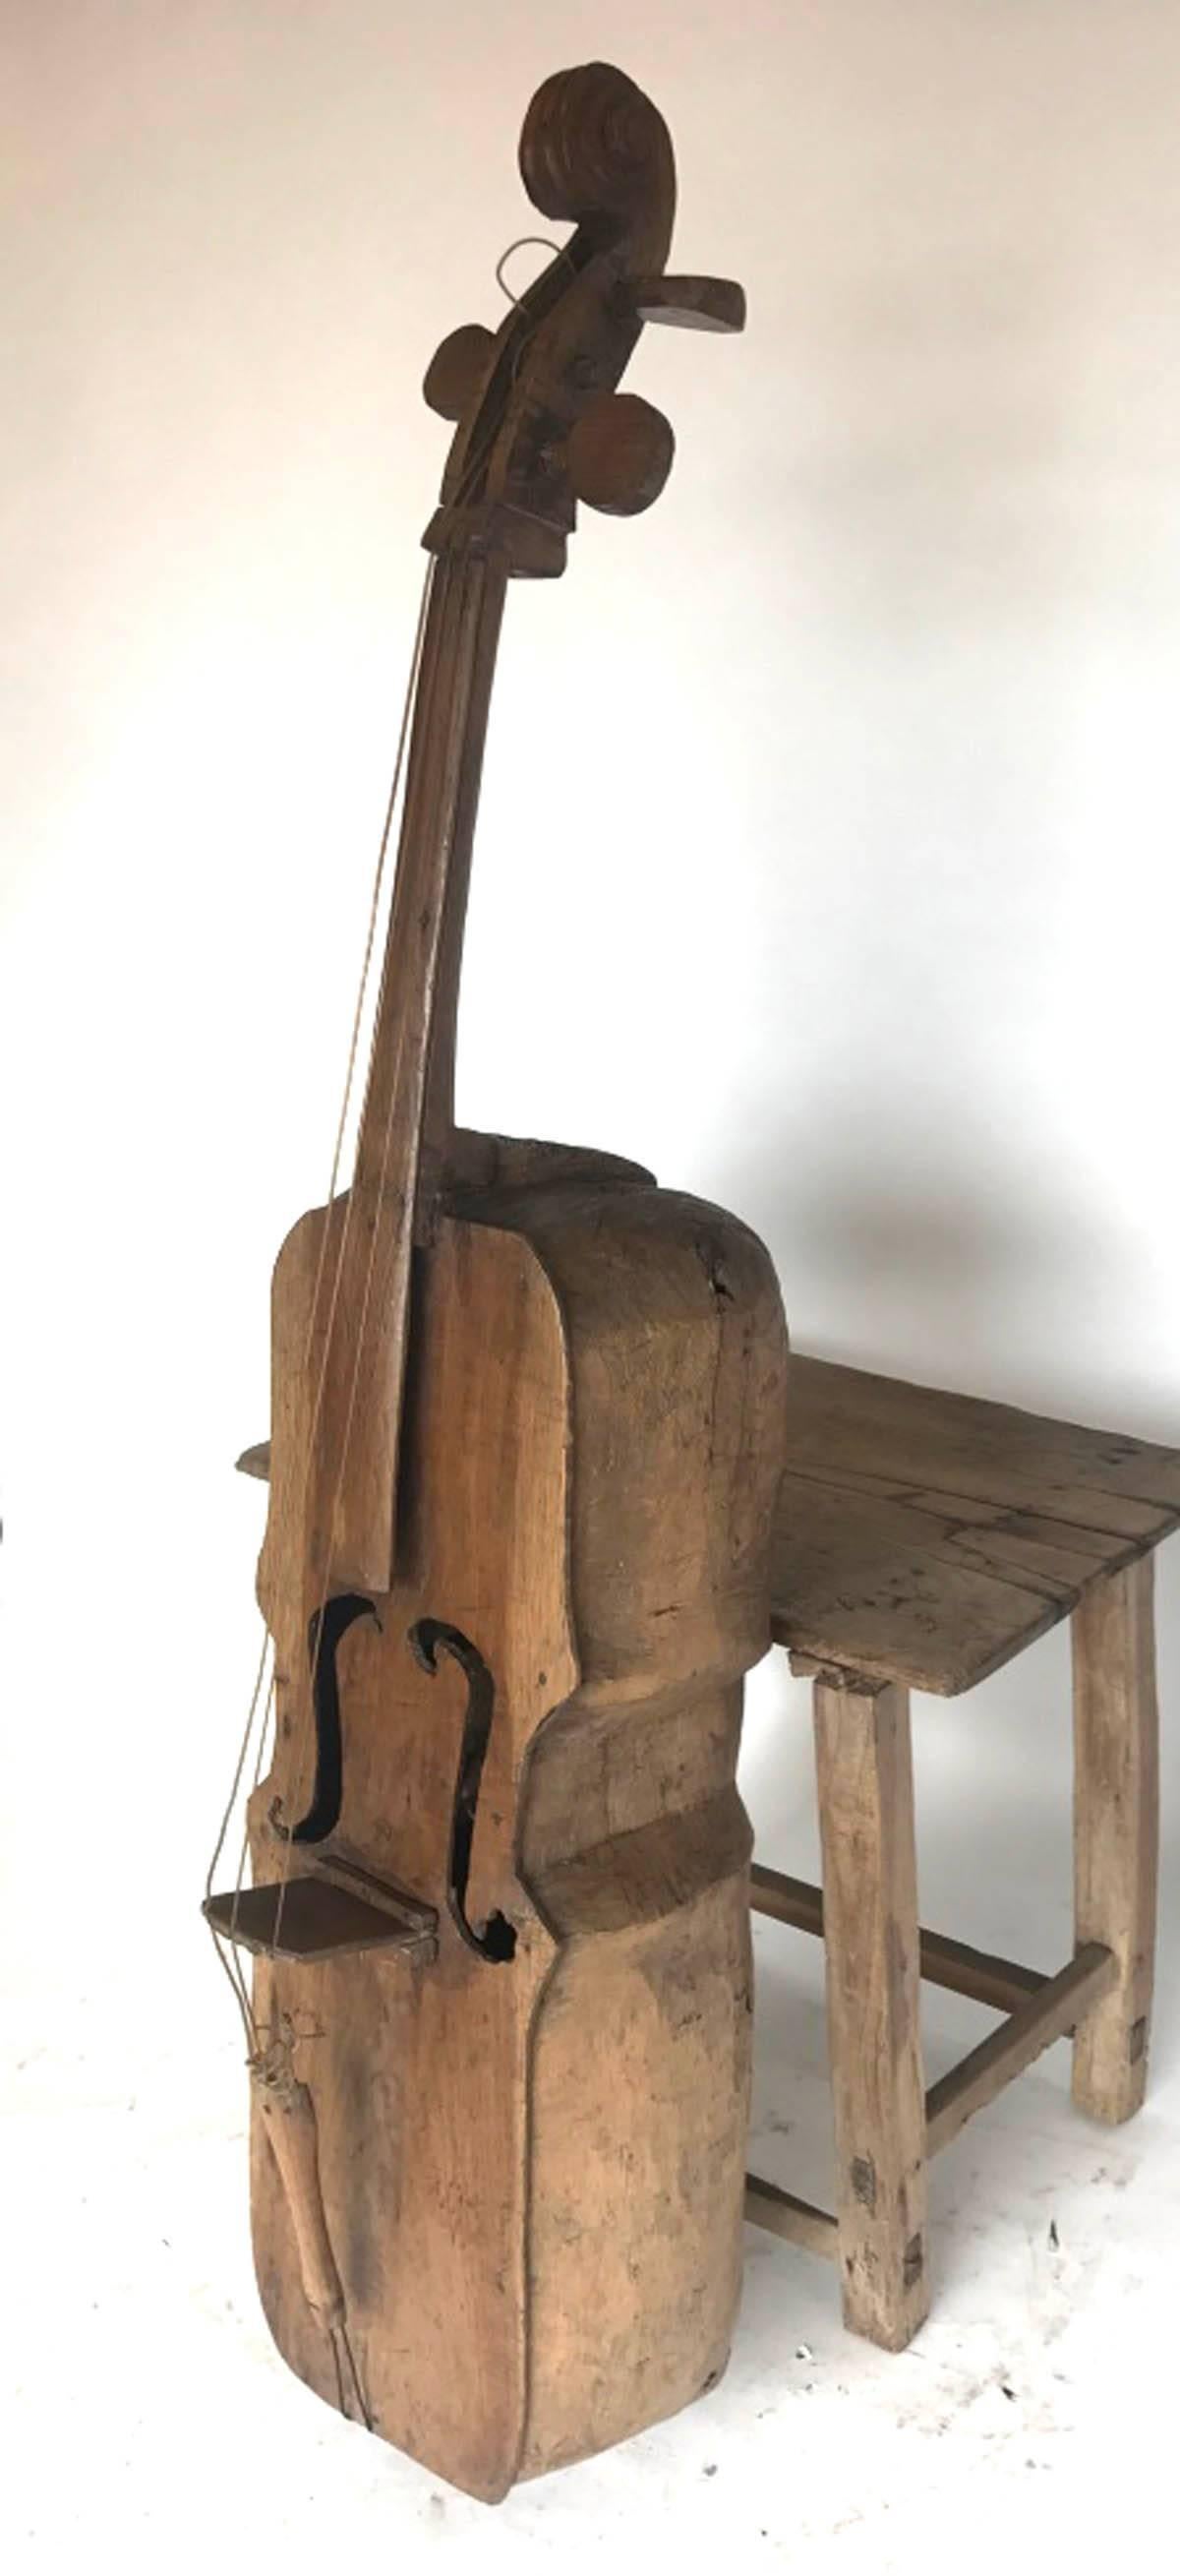 Wonderful piece of Folk Art! Back of body is carved out of one piece of wood. Old mariachi band bass, with a unique, sculptural shape. We have never seen one like this before!